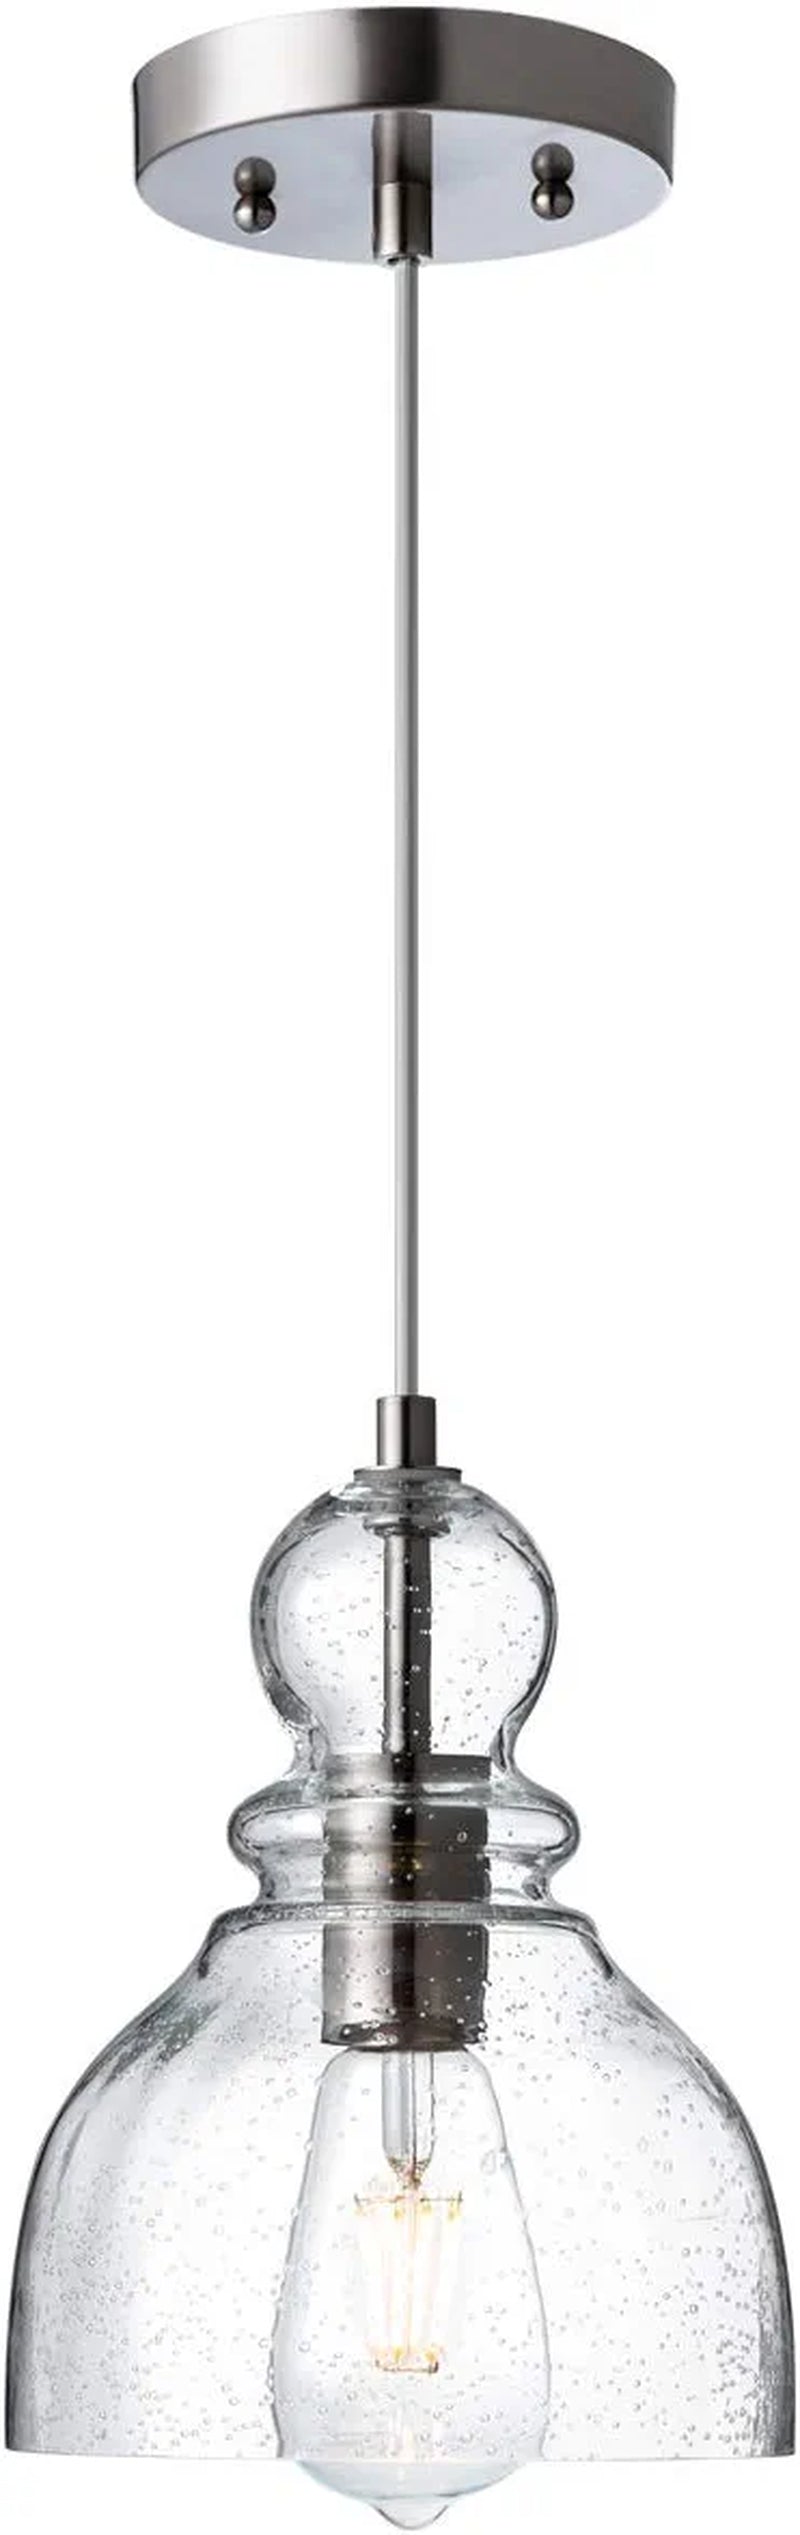 LANROS Farmhouse Kitchen Pendant Lighting with Handblown Clear Seeded Glass Shade, Adjustable Cord Mini Ceiling Light Fixture for Kitchen Island Sink, Matte Black Finish, 7Inch, 1 Pack Home & Garden > Lighting > Lighting Fixtures DONGLAIMEI Brushed Nickle 7inch 